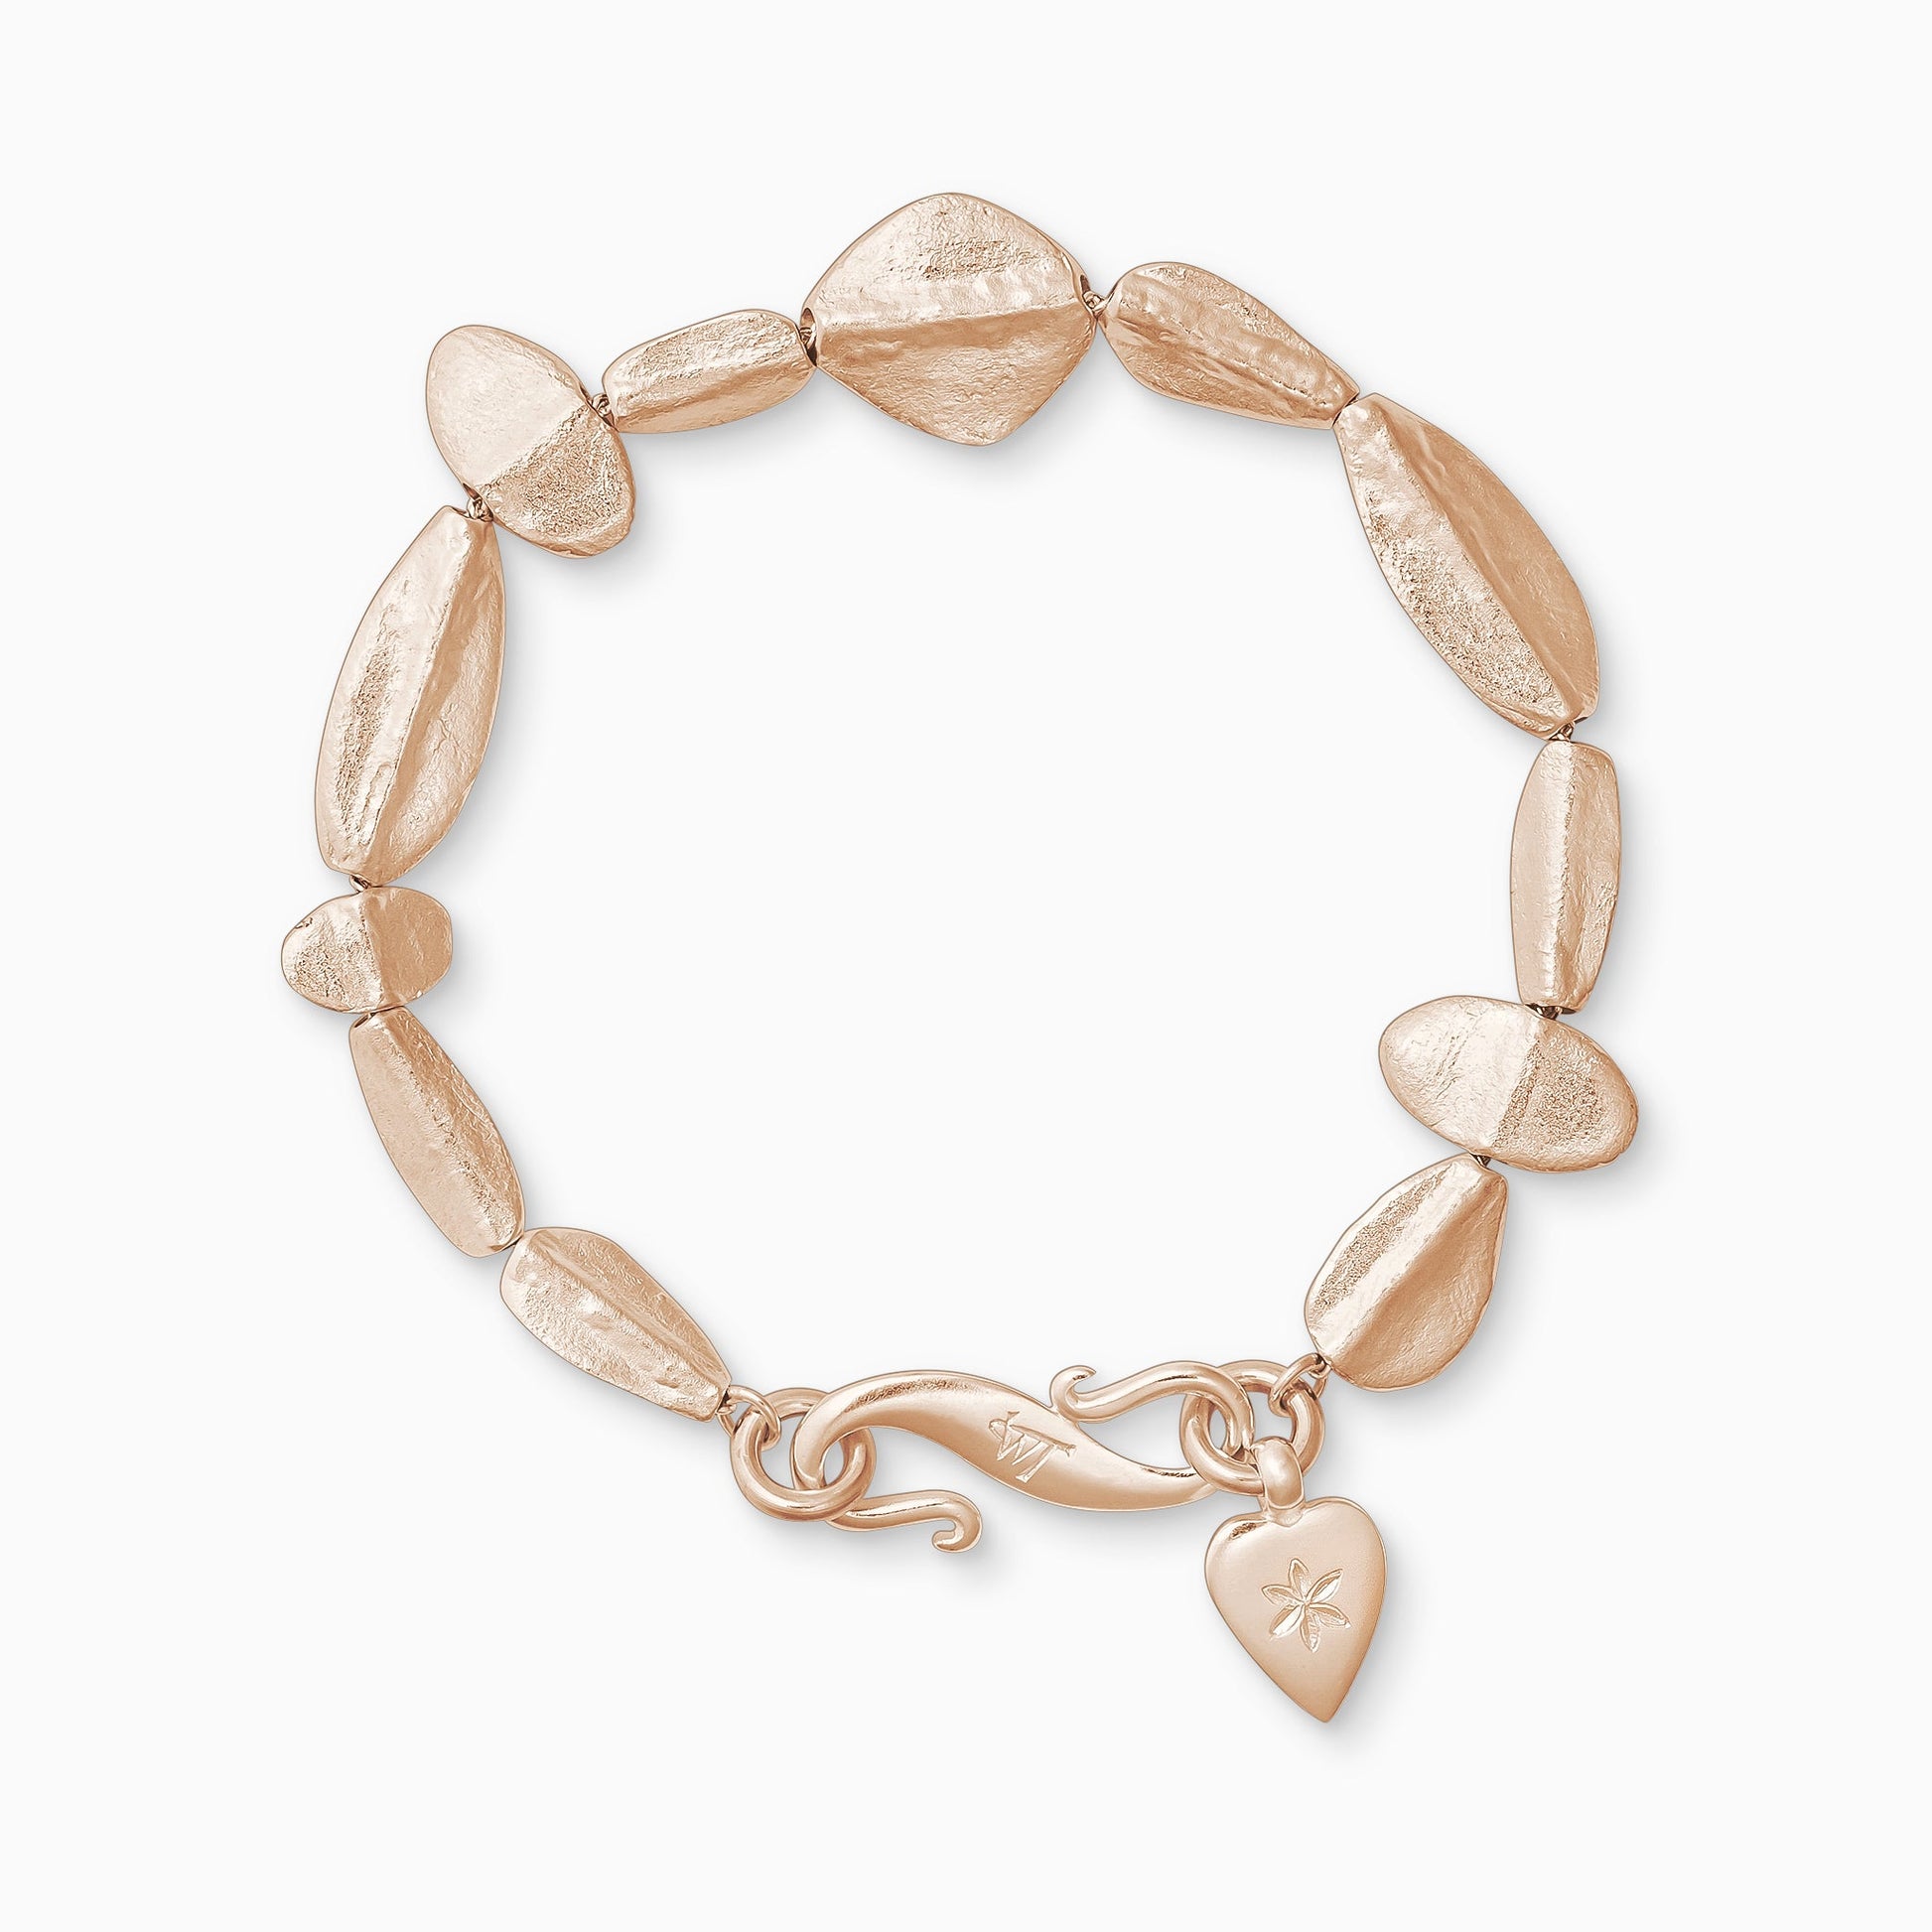 An 18ct Fairtrade rose gold bracelet of handmade textured beads with a central ridge.  Finished with a smooth heart shaped charm engraved with a 6 petal flower and our signature ’S’ clasp. Bracelet length 190mm.. Beads varying sizes from 11mm x 6mm to 35mm x 15mm.